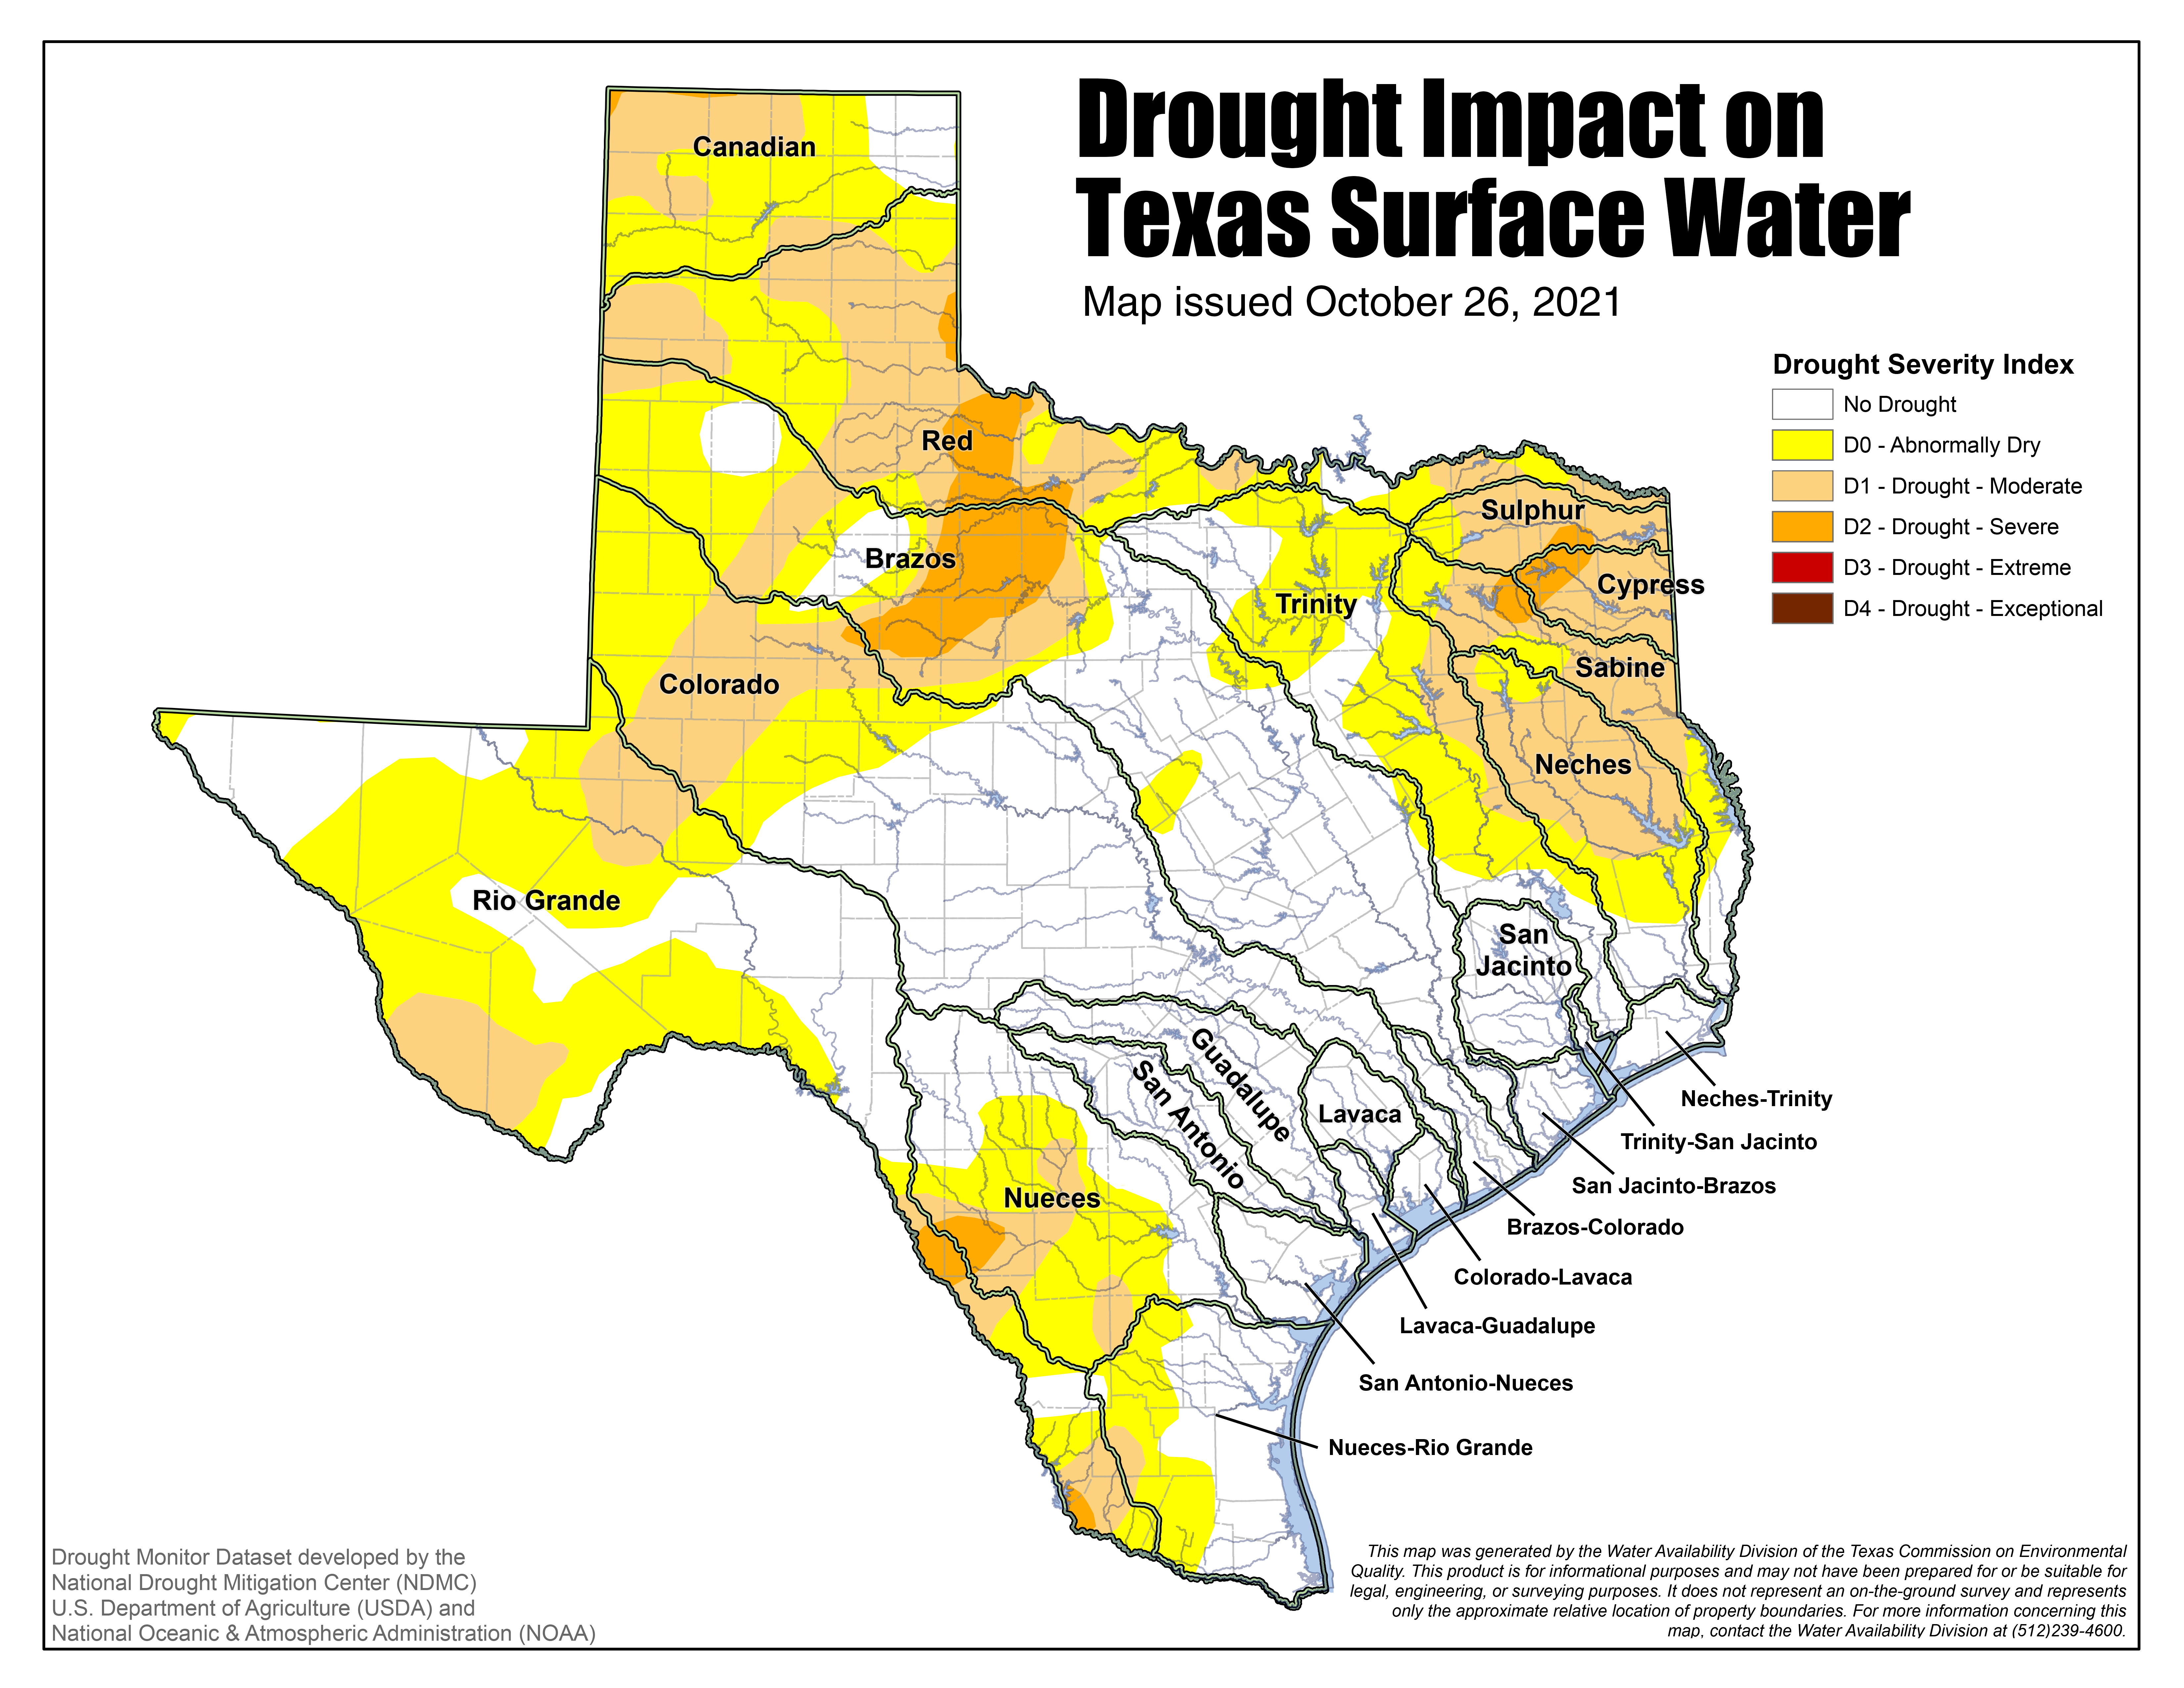 Map of Drought Impact on Texas Surface Water from TCEQ